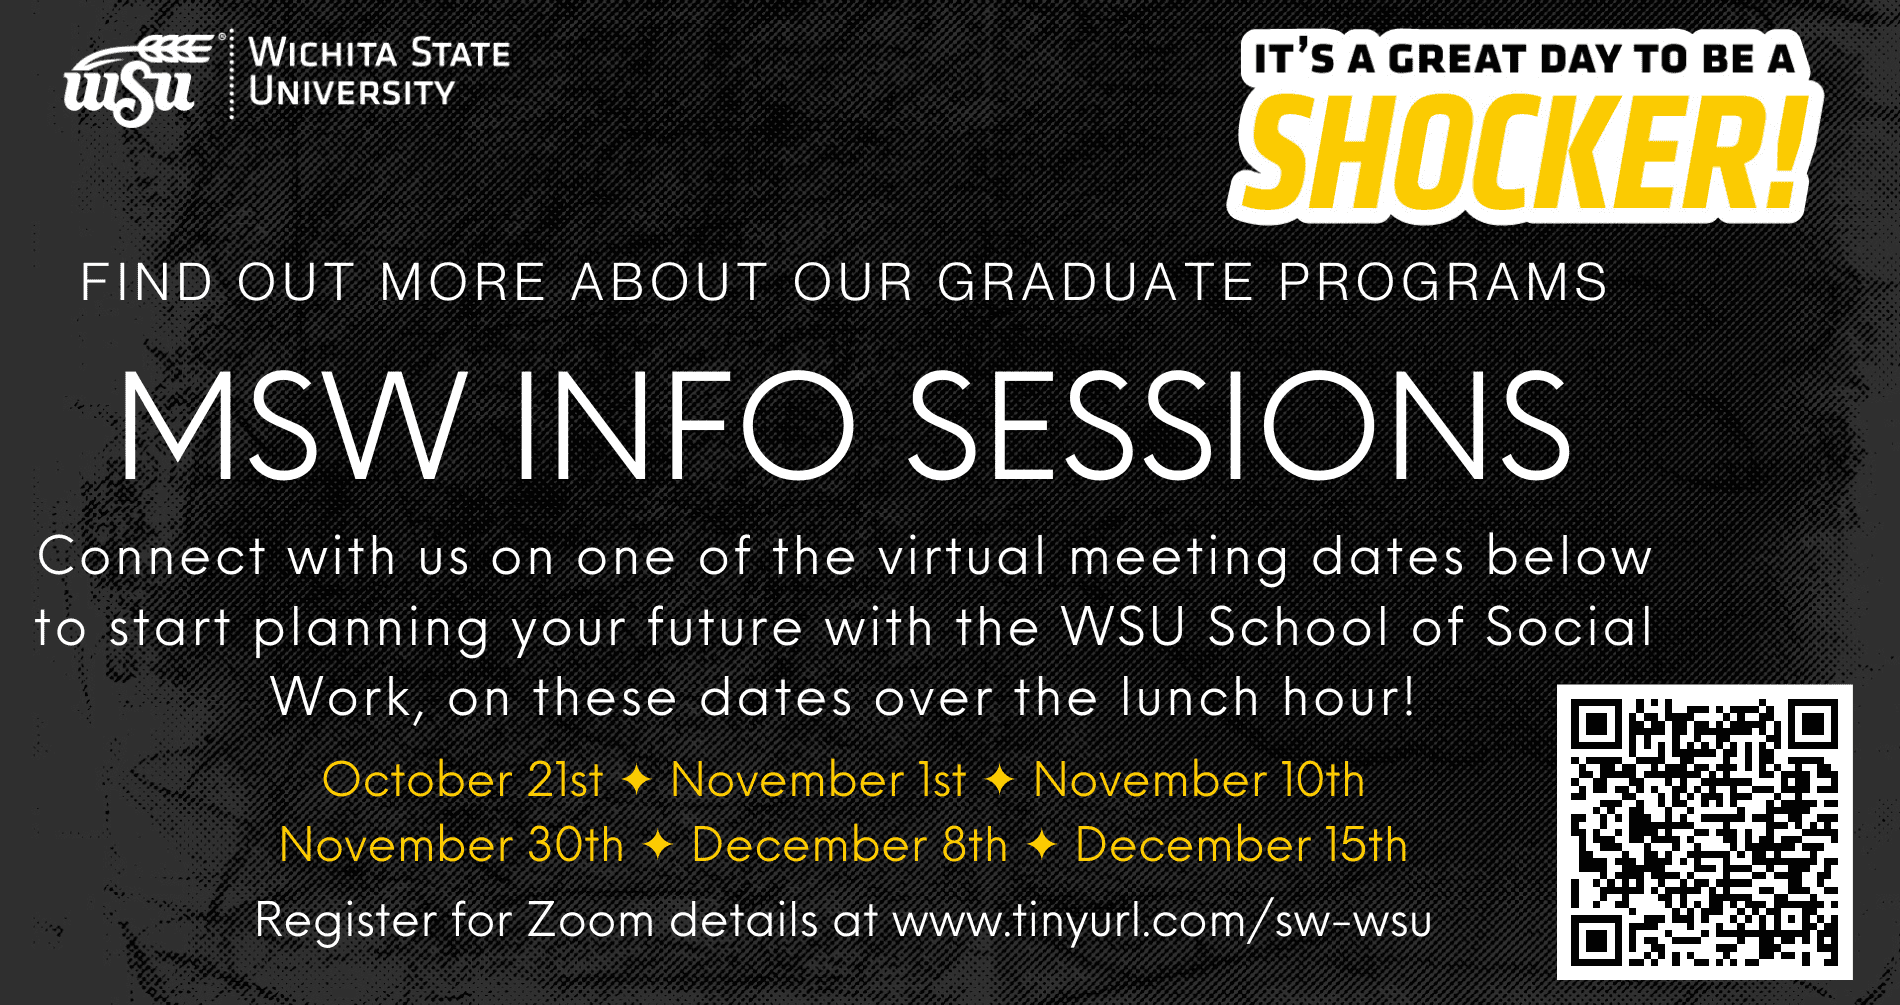 Wichita State University - it's a great day to be a Shocker! Find out more about our graduate programs. MSW INFO SESSIONS. Connect with us on one of the virtual meeting dates below to start planning your future with the WSU School of Social Work, on these dates over the lunch hour! October 21, November 1, November 10, November 30, December 8, December 15. Register for Zoom details at www.tinyurl.com/sw-wsu